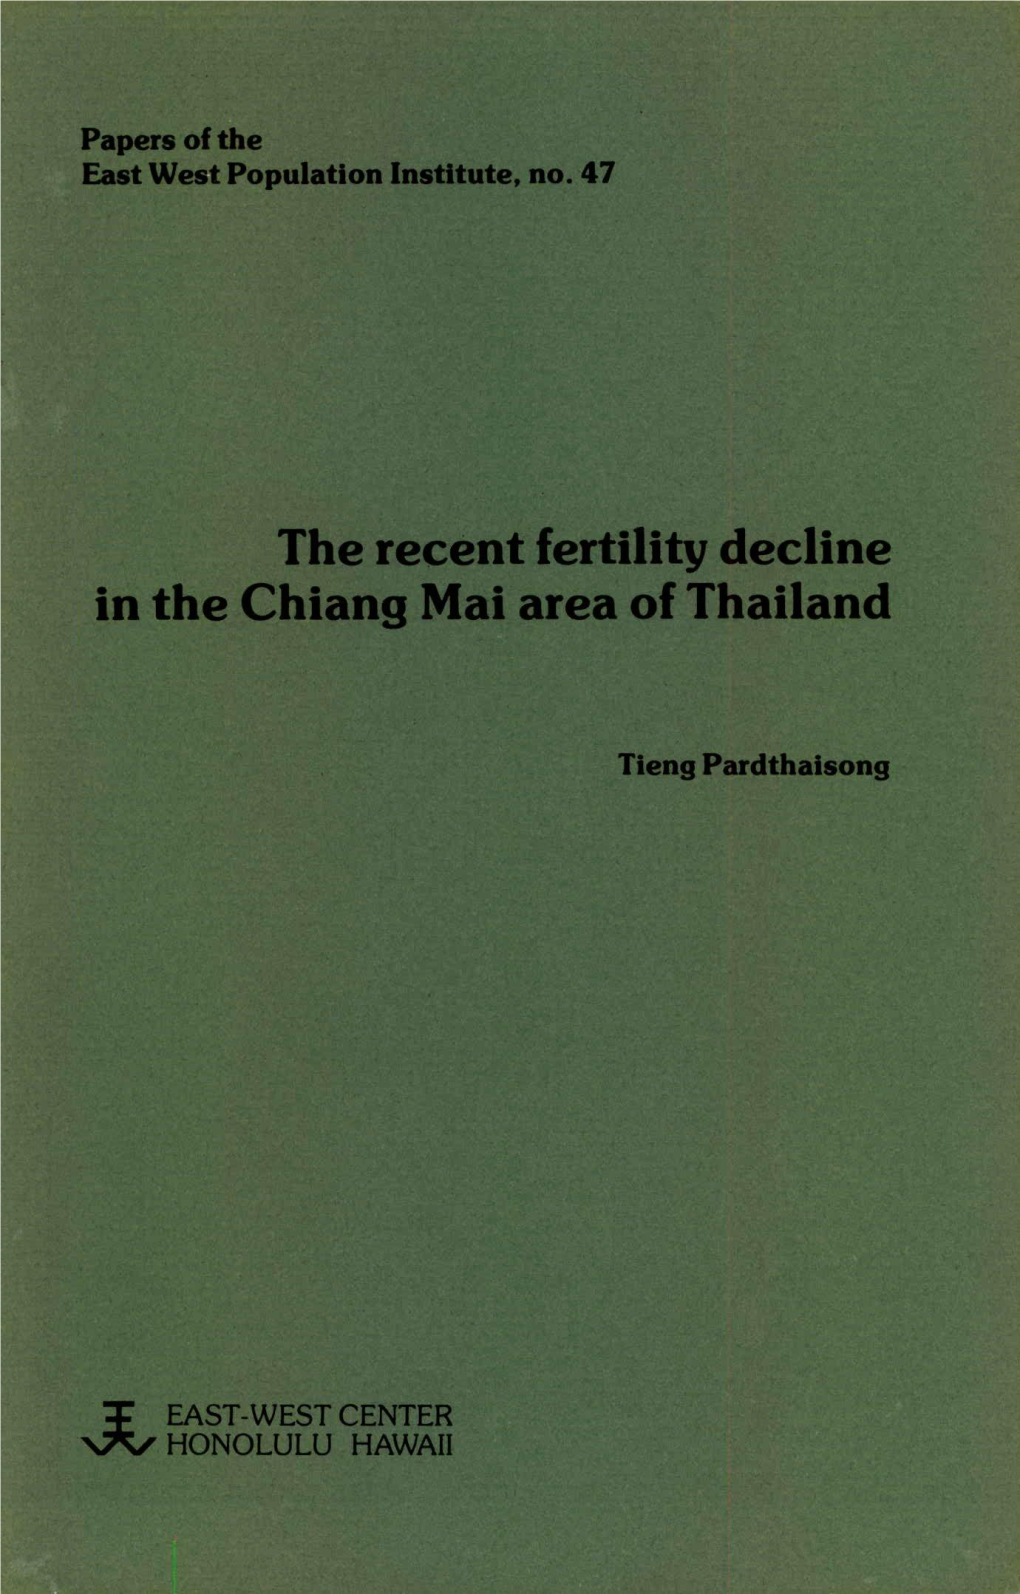 Recent Fertility Decline in the Chiang Mai Area of Thailand